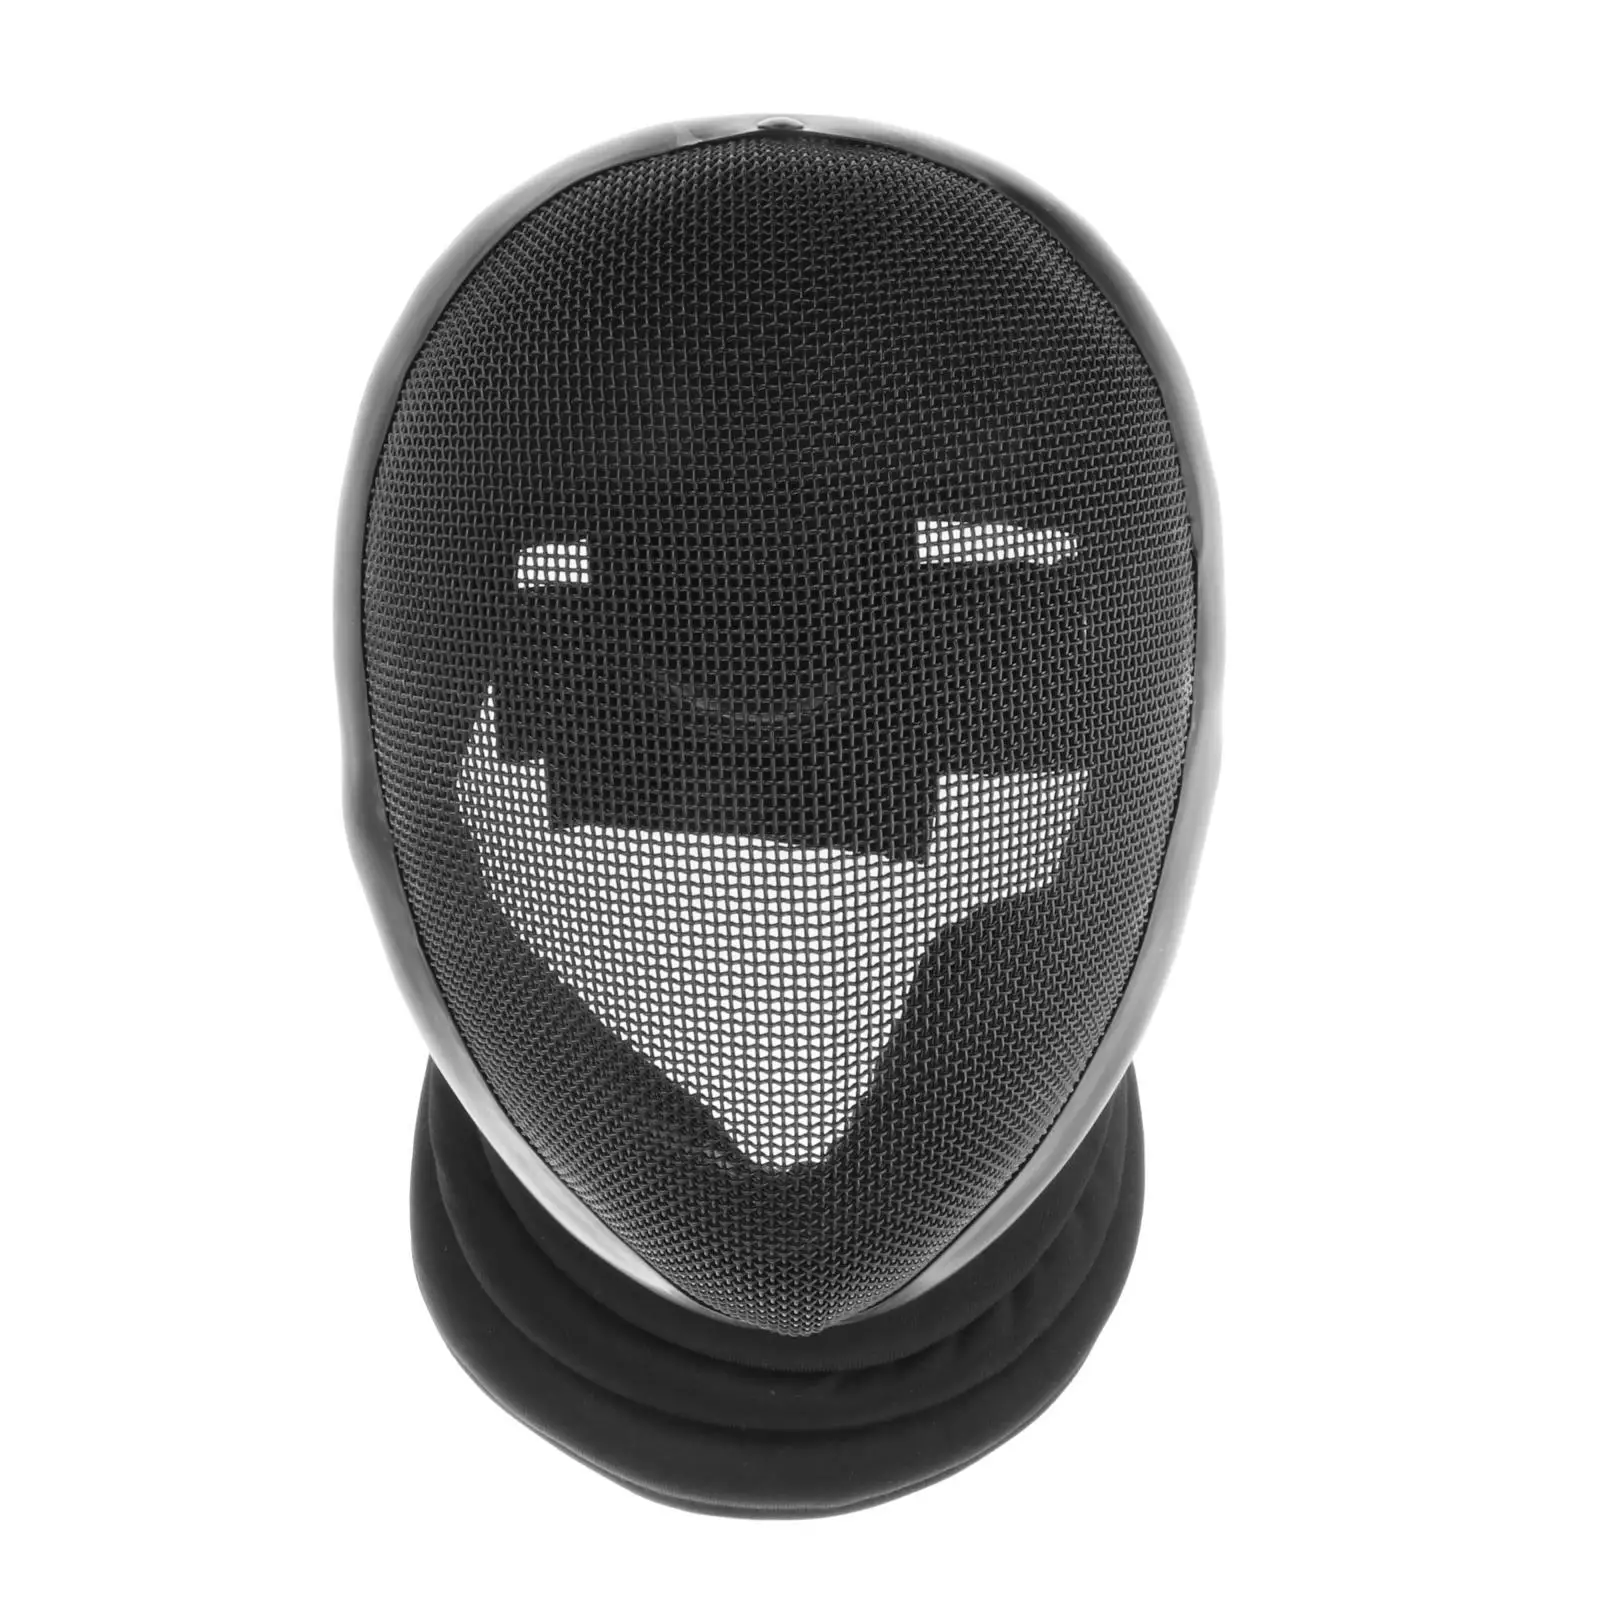 Face Shield Multifunction Protect Professional Durable Epee Gears Kendo Portable Fencing Helmet for Device Supplies Practice